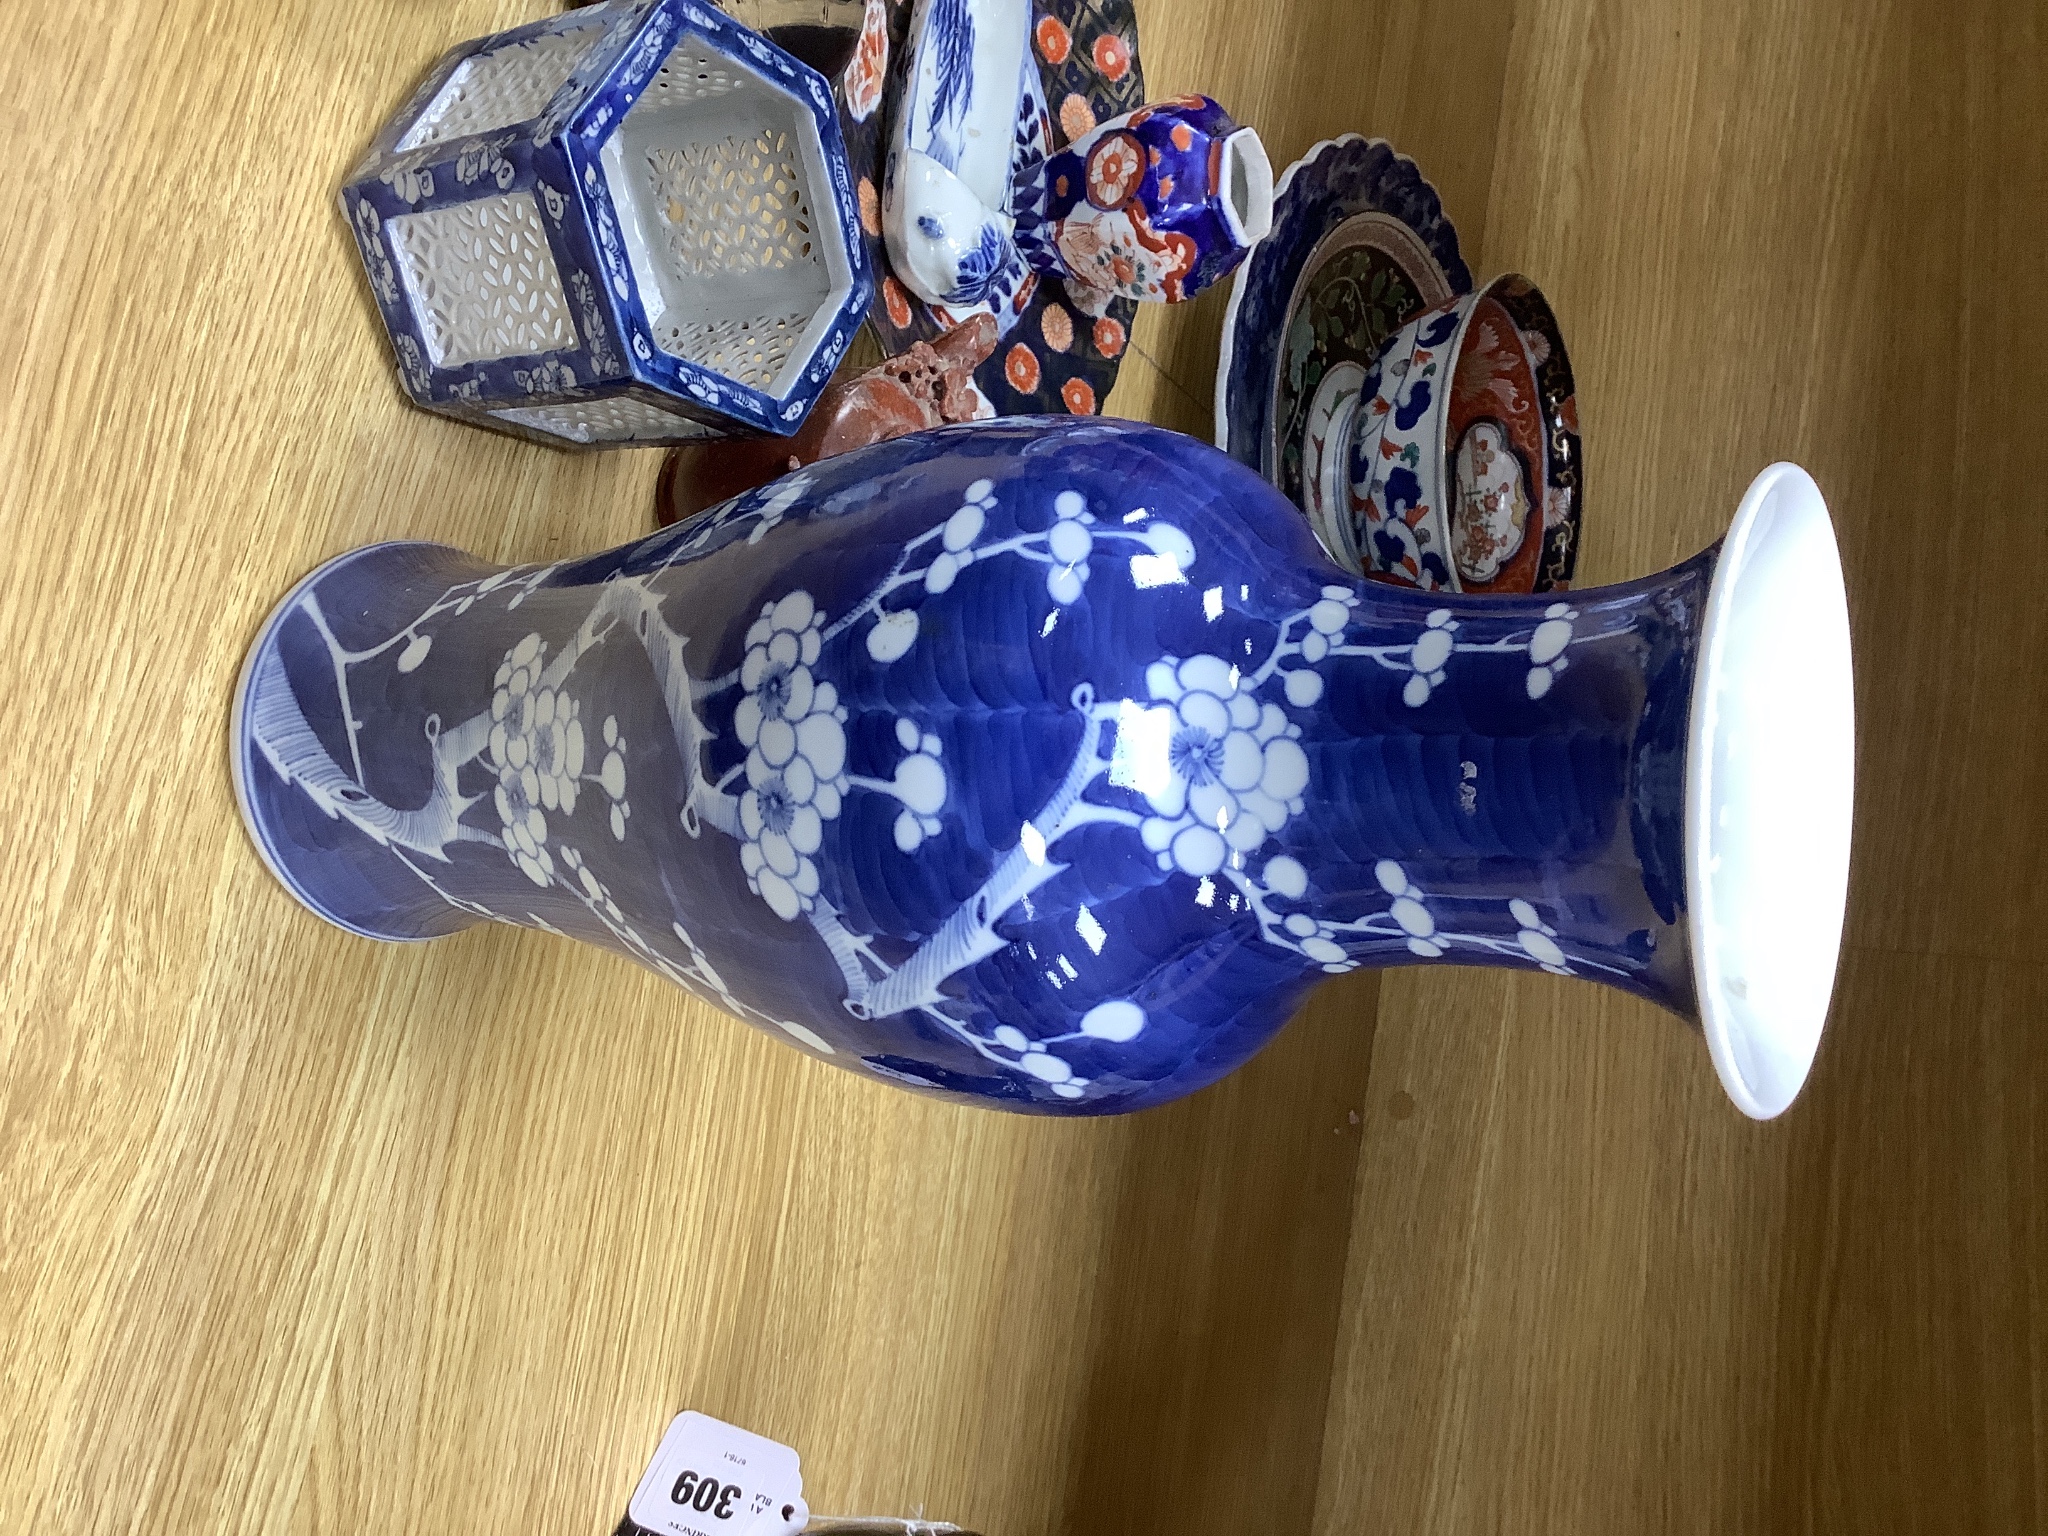 An early 20th century Chinese blue and white prunus vase, group of Chinese, Japanese porcelain Rex Hotel tureens, soapstone wine pot etc